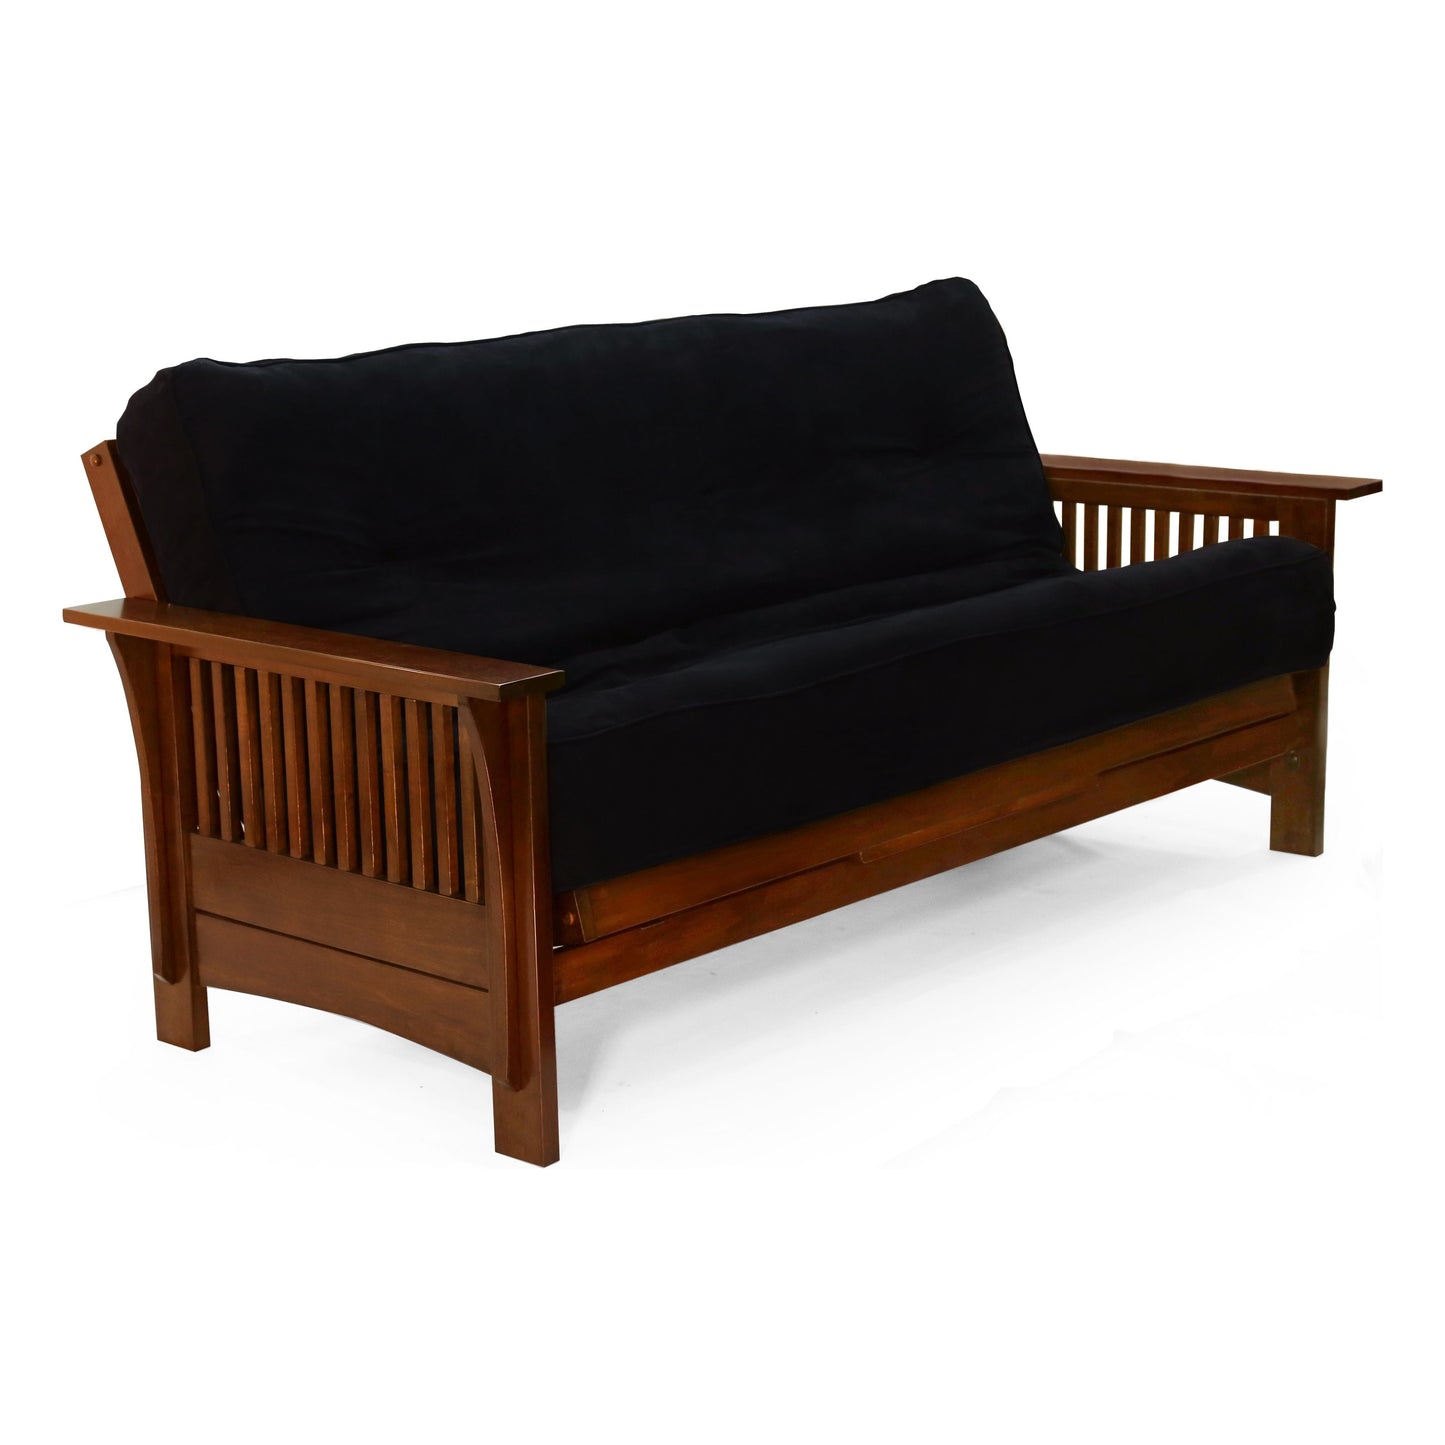 Night and Day Autumn Full Futon Frame in cherry finish